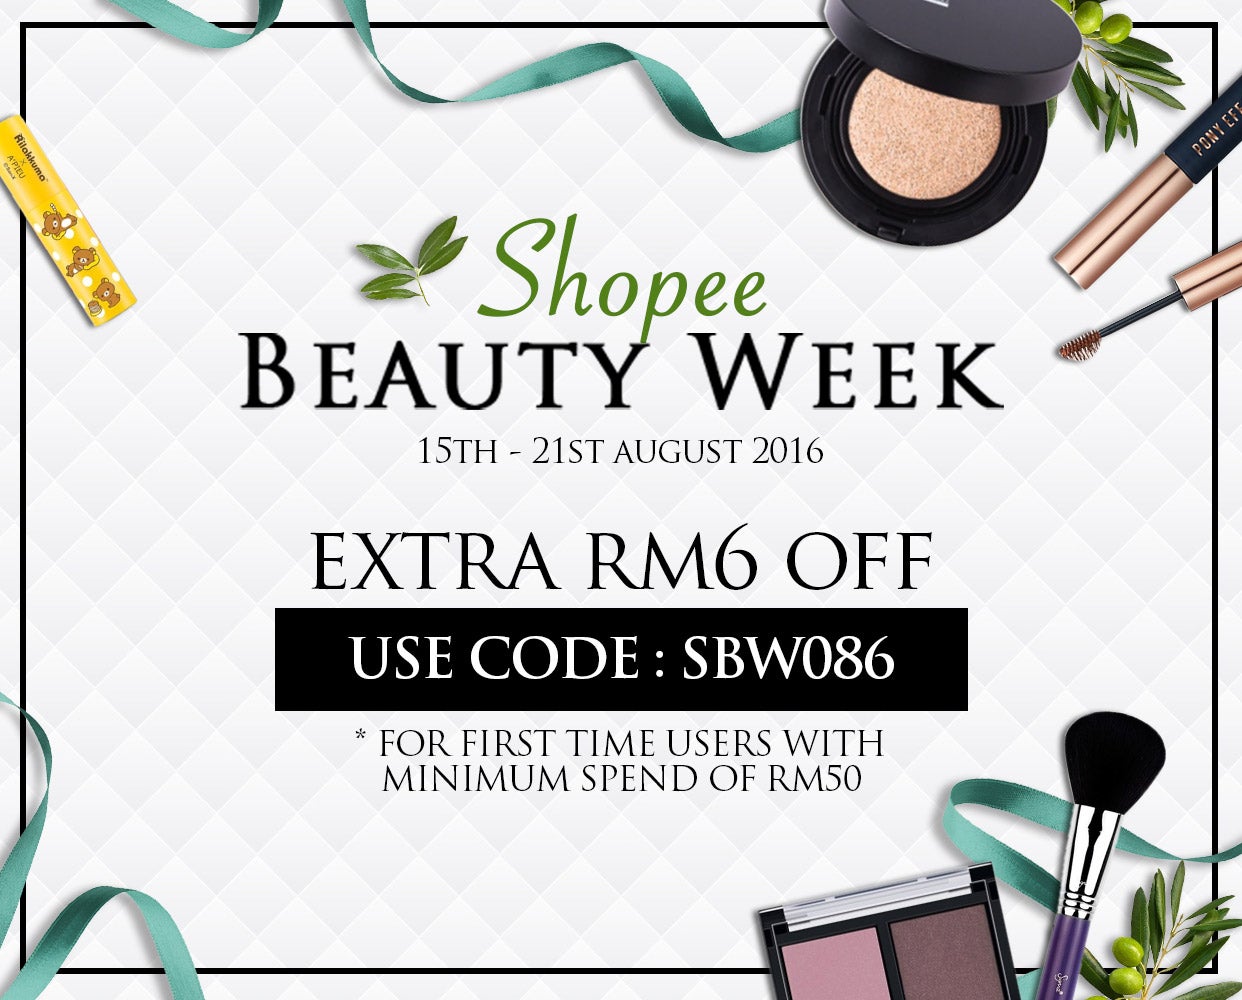 [Test]This Is What Every Malaysian Needs For Their Ultimate Beauty Affairs - World Of Buzz 1